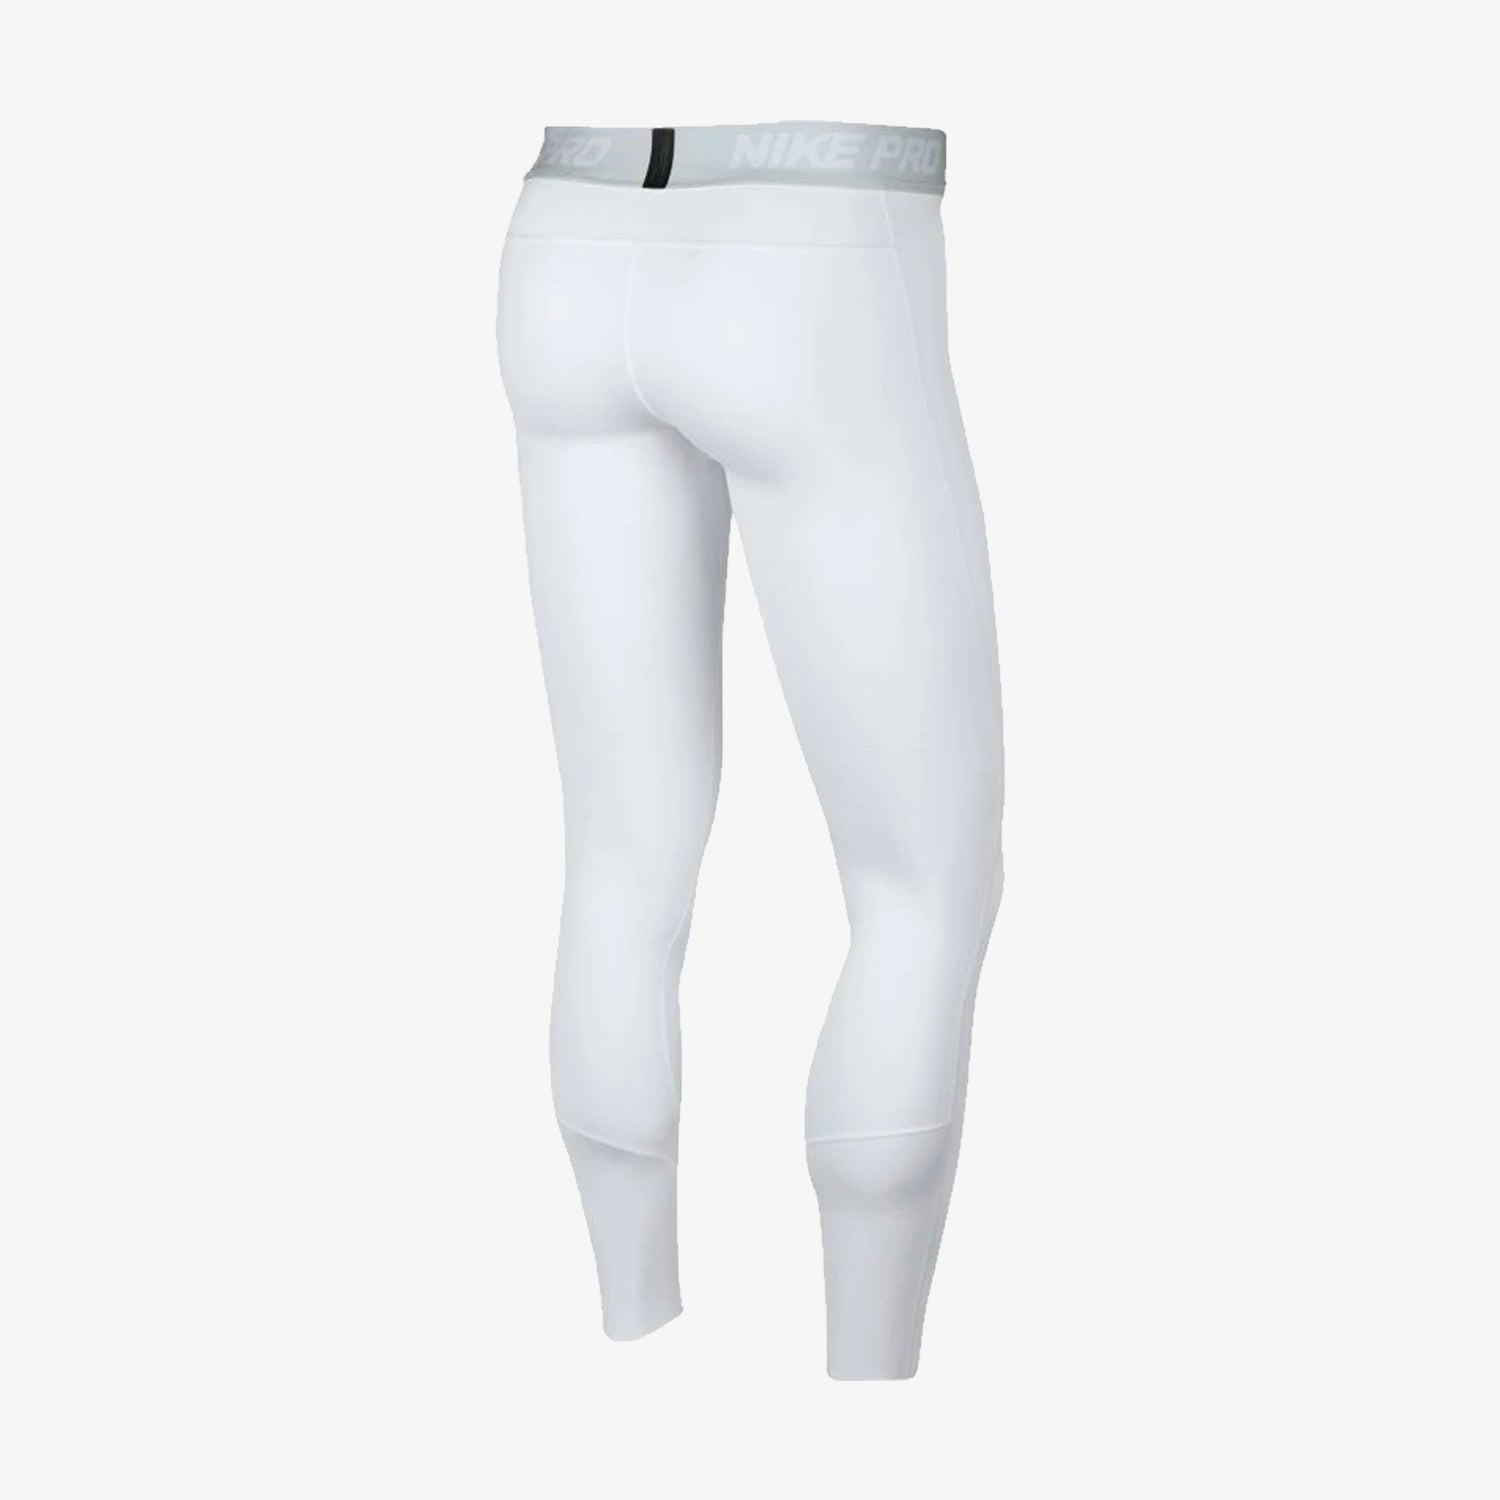 Nike Pro Dri-Fit Compression Pants Men's White New with Tags XL 170 -  Locker Room Direct